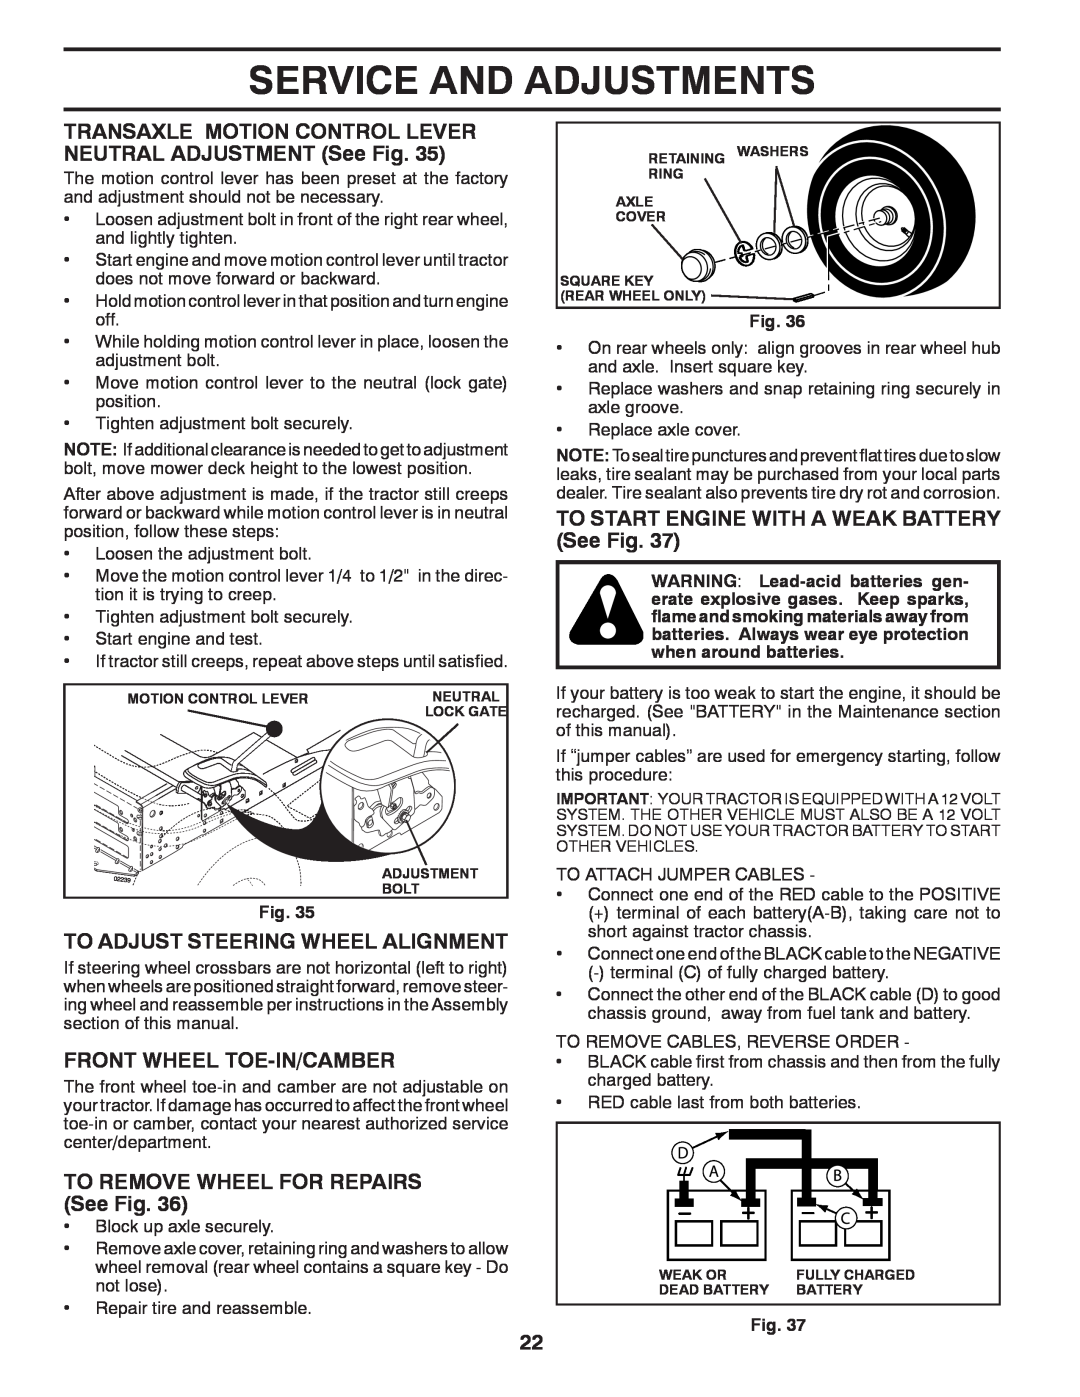 Poulan 435712 Service And Adjustments, TO START ENGINE WITH A WEAK BATTERY See Fig, To Adjust Steering Wheel Alignment 